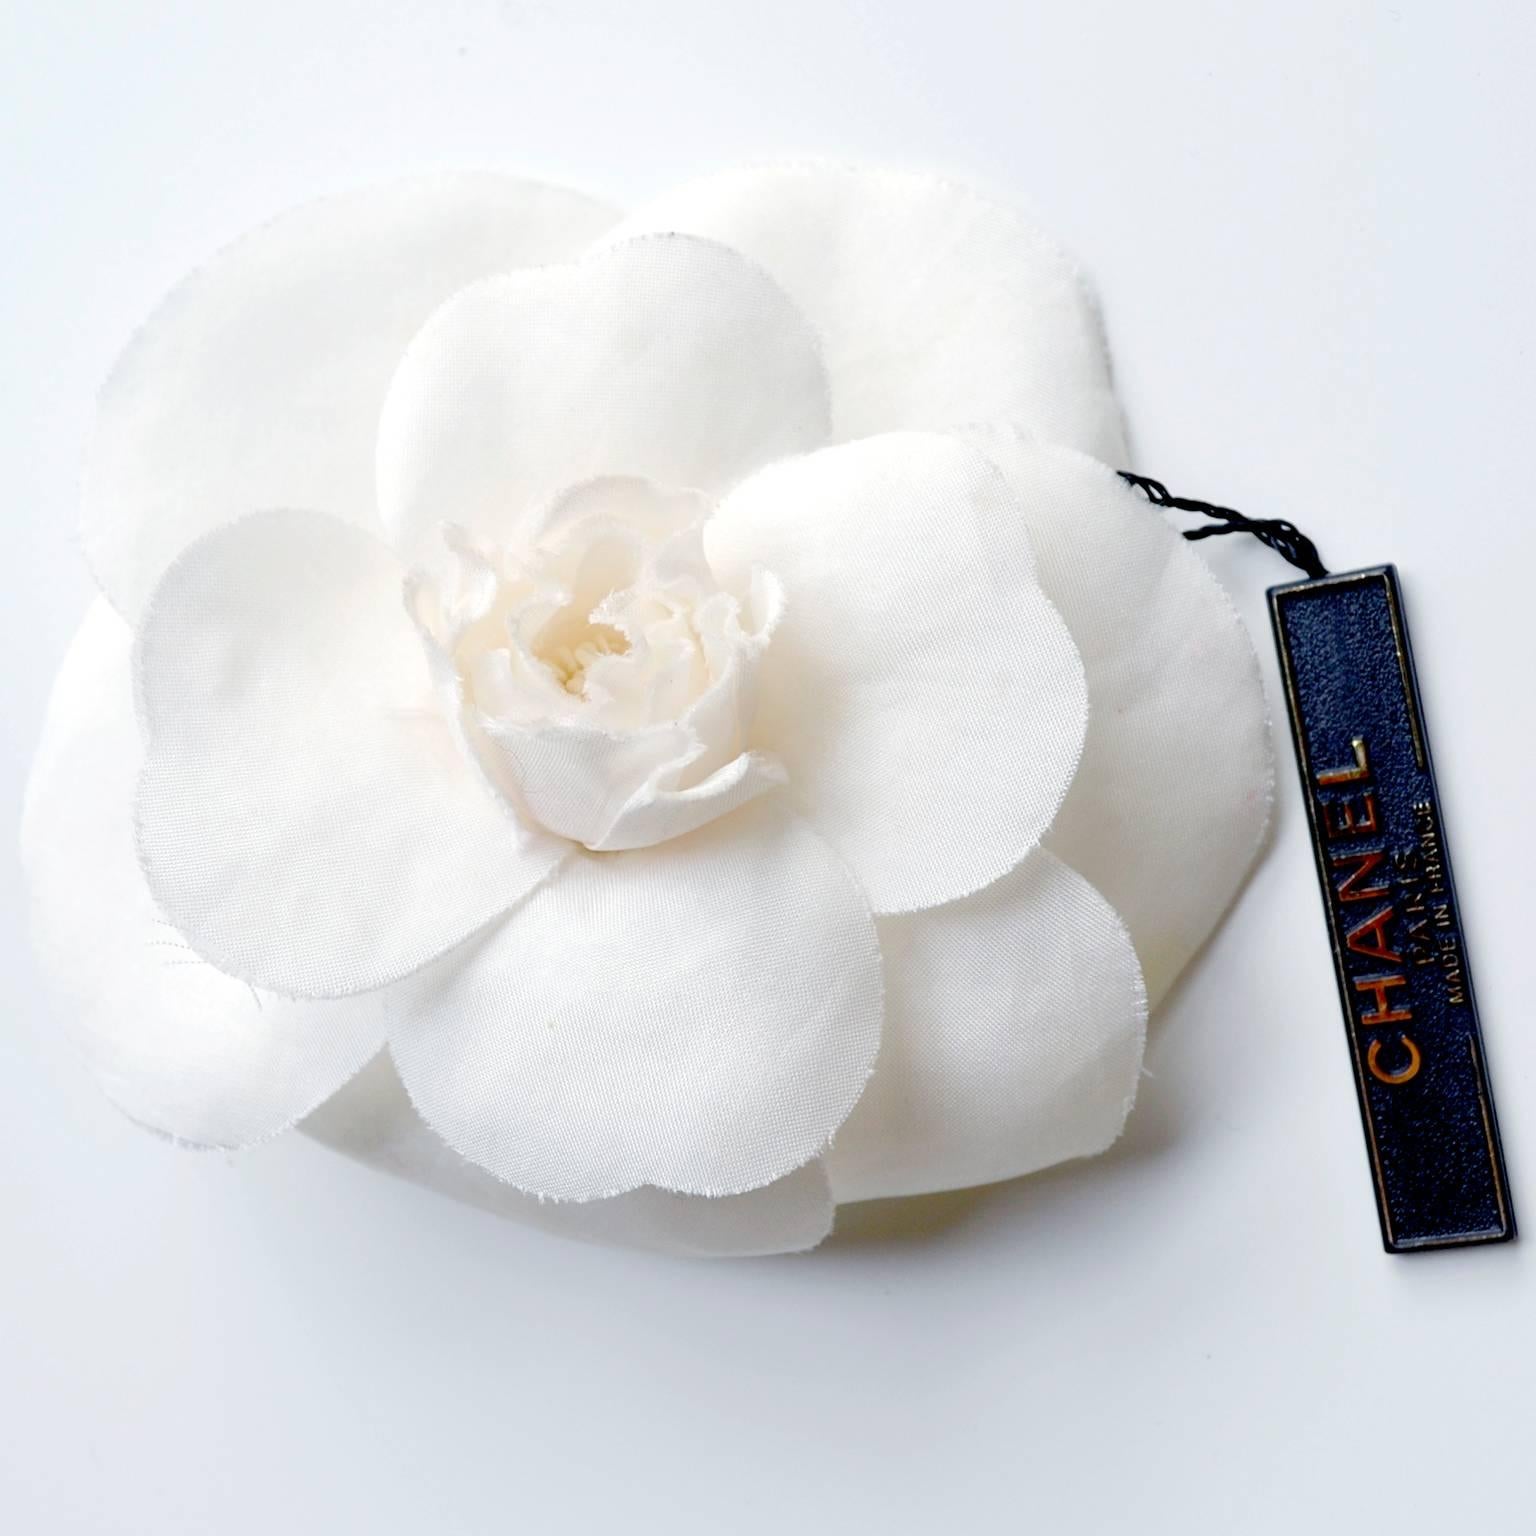 This original Chanel Camelia silk brooch or lapel pin comes with its tags still attached and in its original box.  This lovely brooch is ivory and could be worn in a number of ways!  The Chanel gold tone plate reads: 